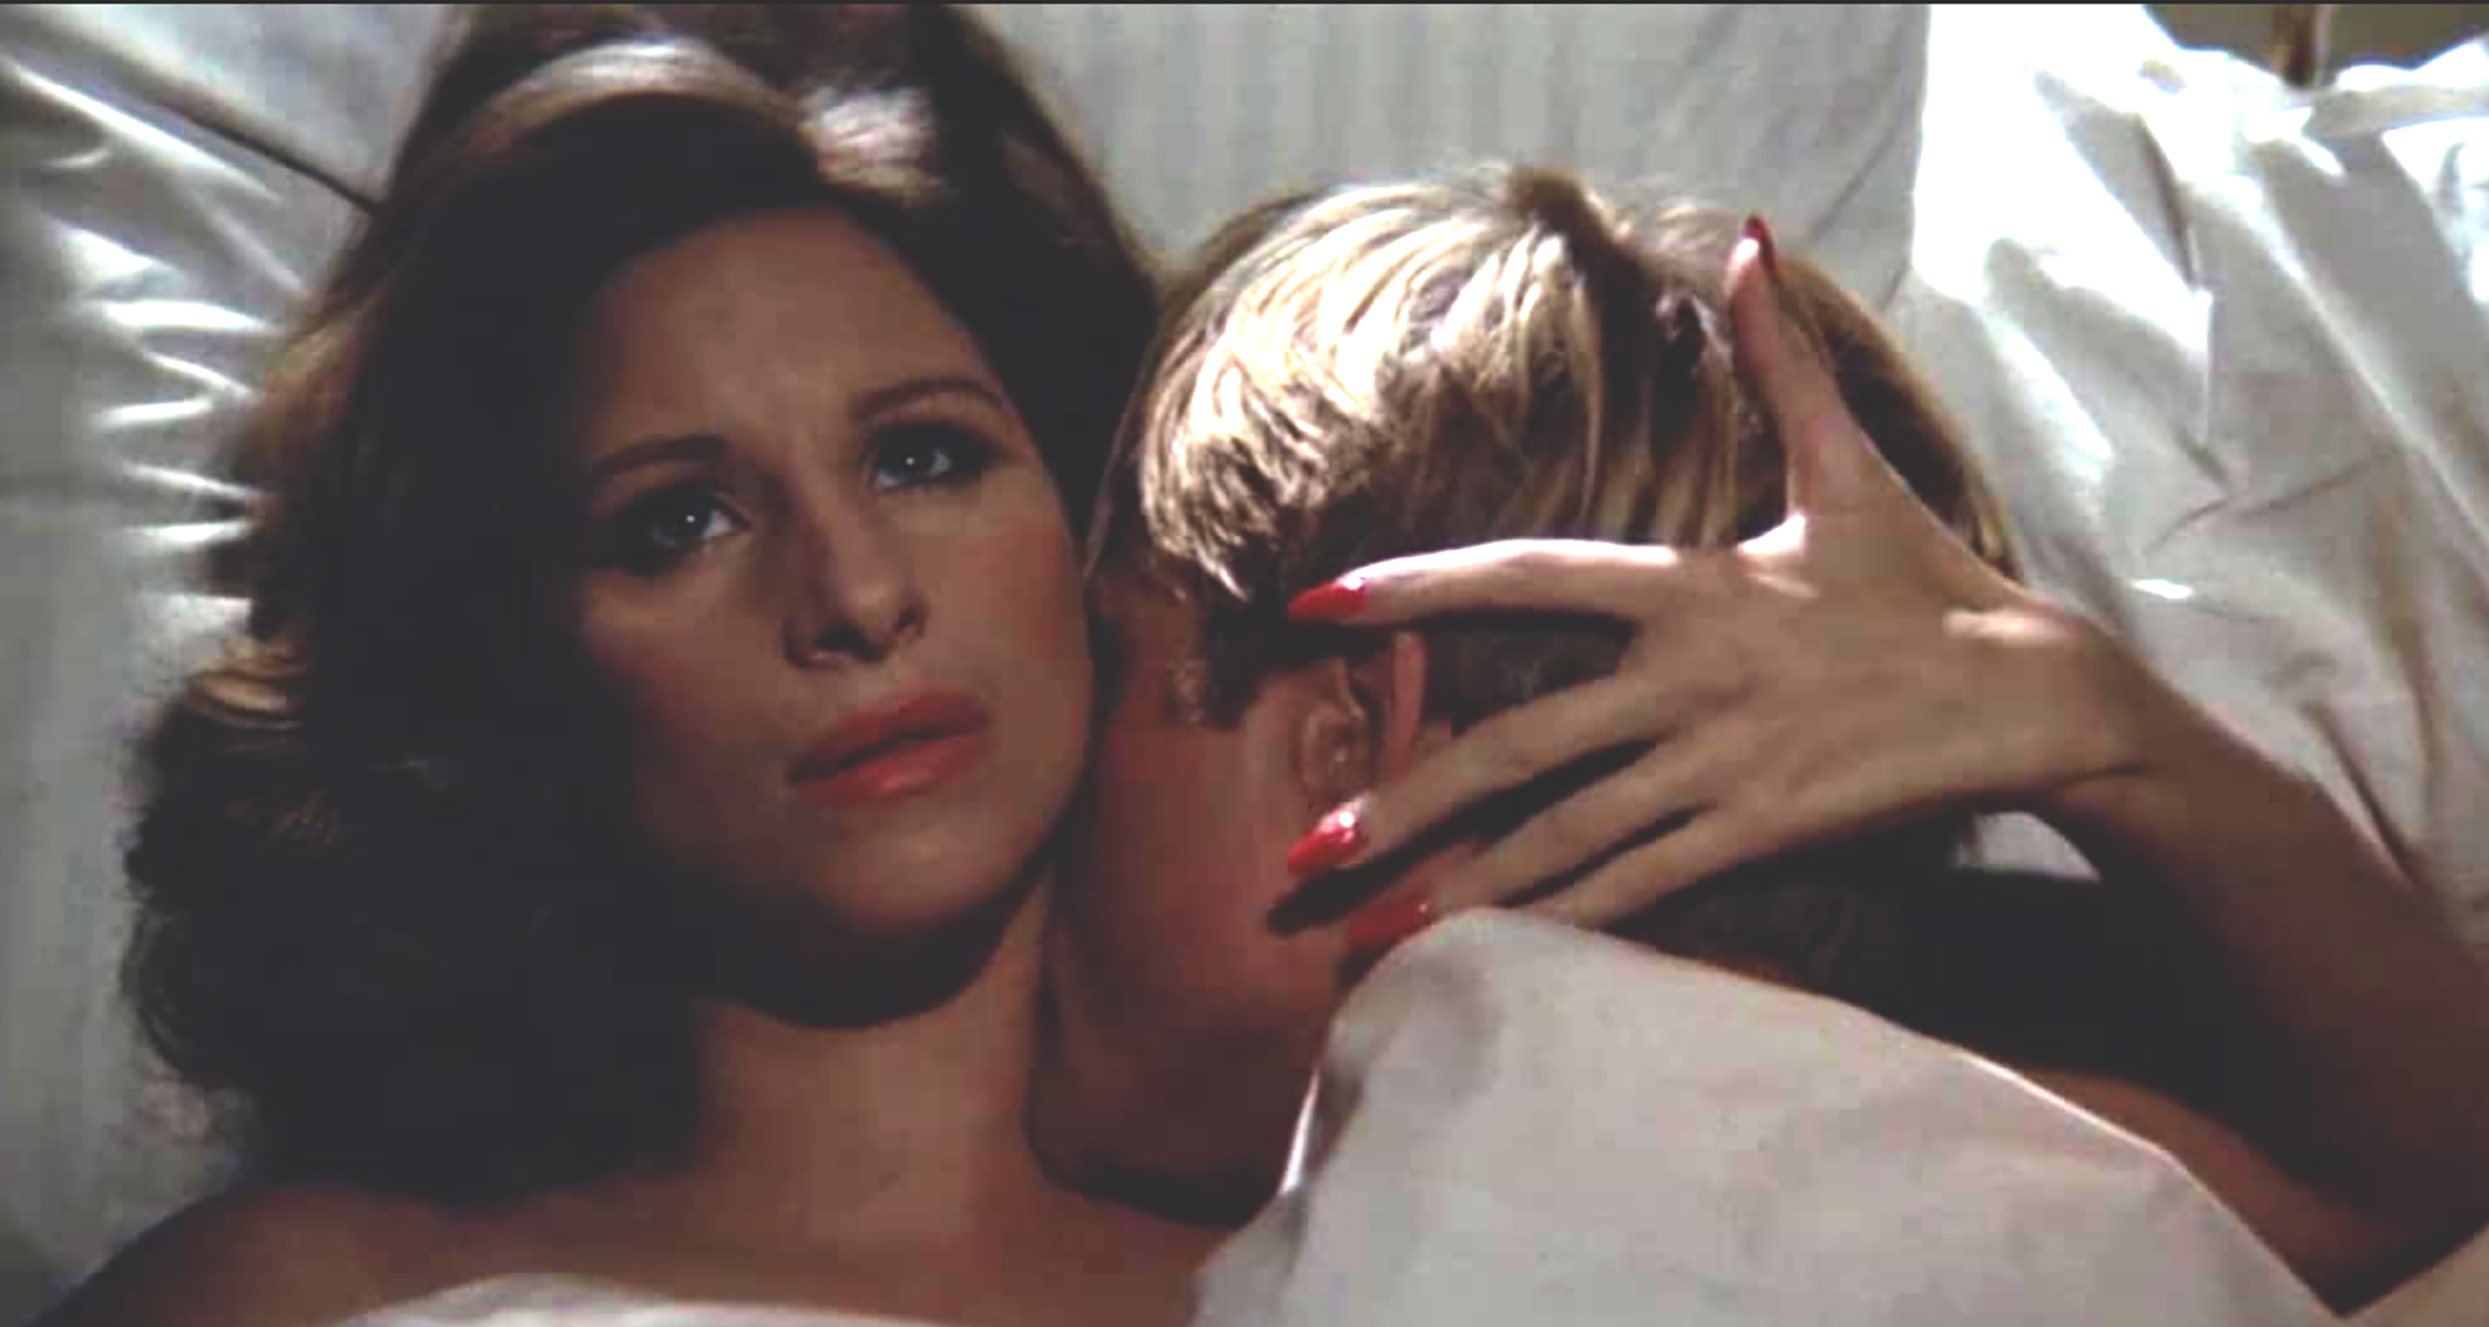 Robert Redford and Barbra Streisand as they lie in bed in a scene from the film “The Way We Were” (1973) 